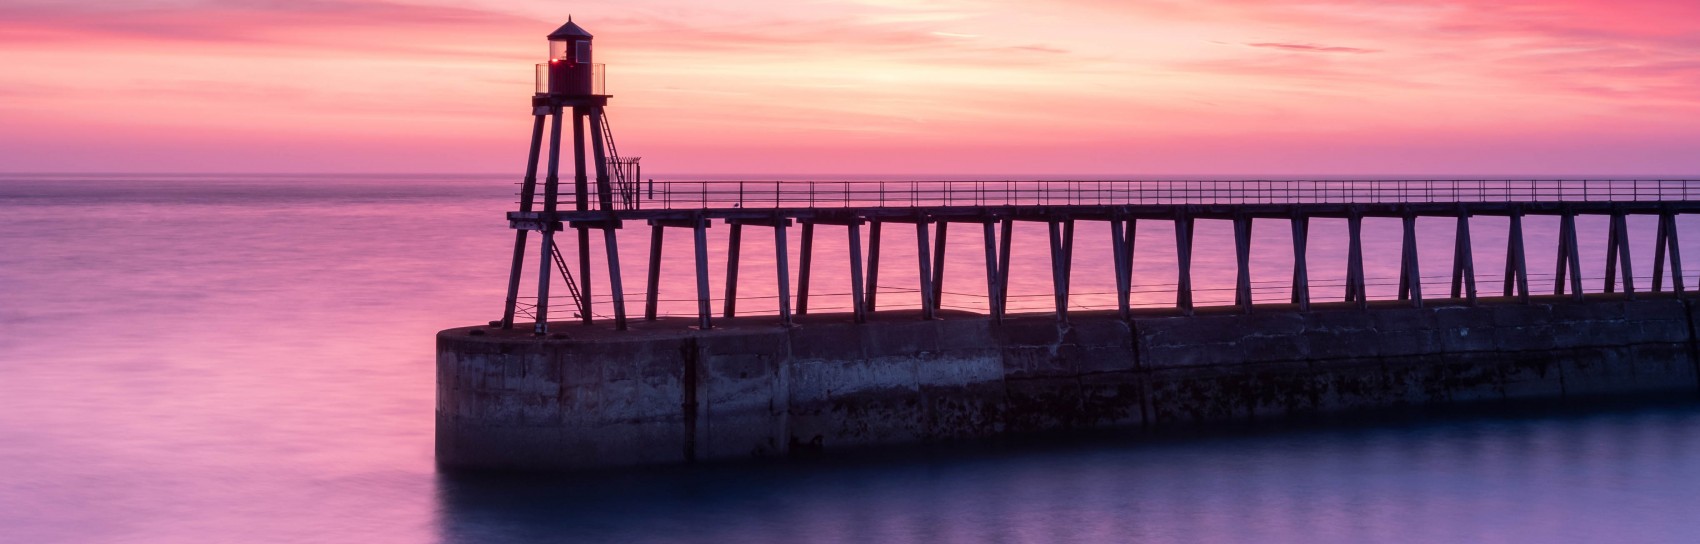 Sunrise at Whitby on the Yorkshire coast. Photograph by MATT HILLIER